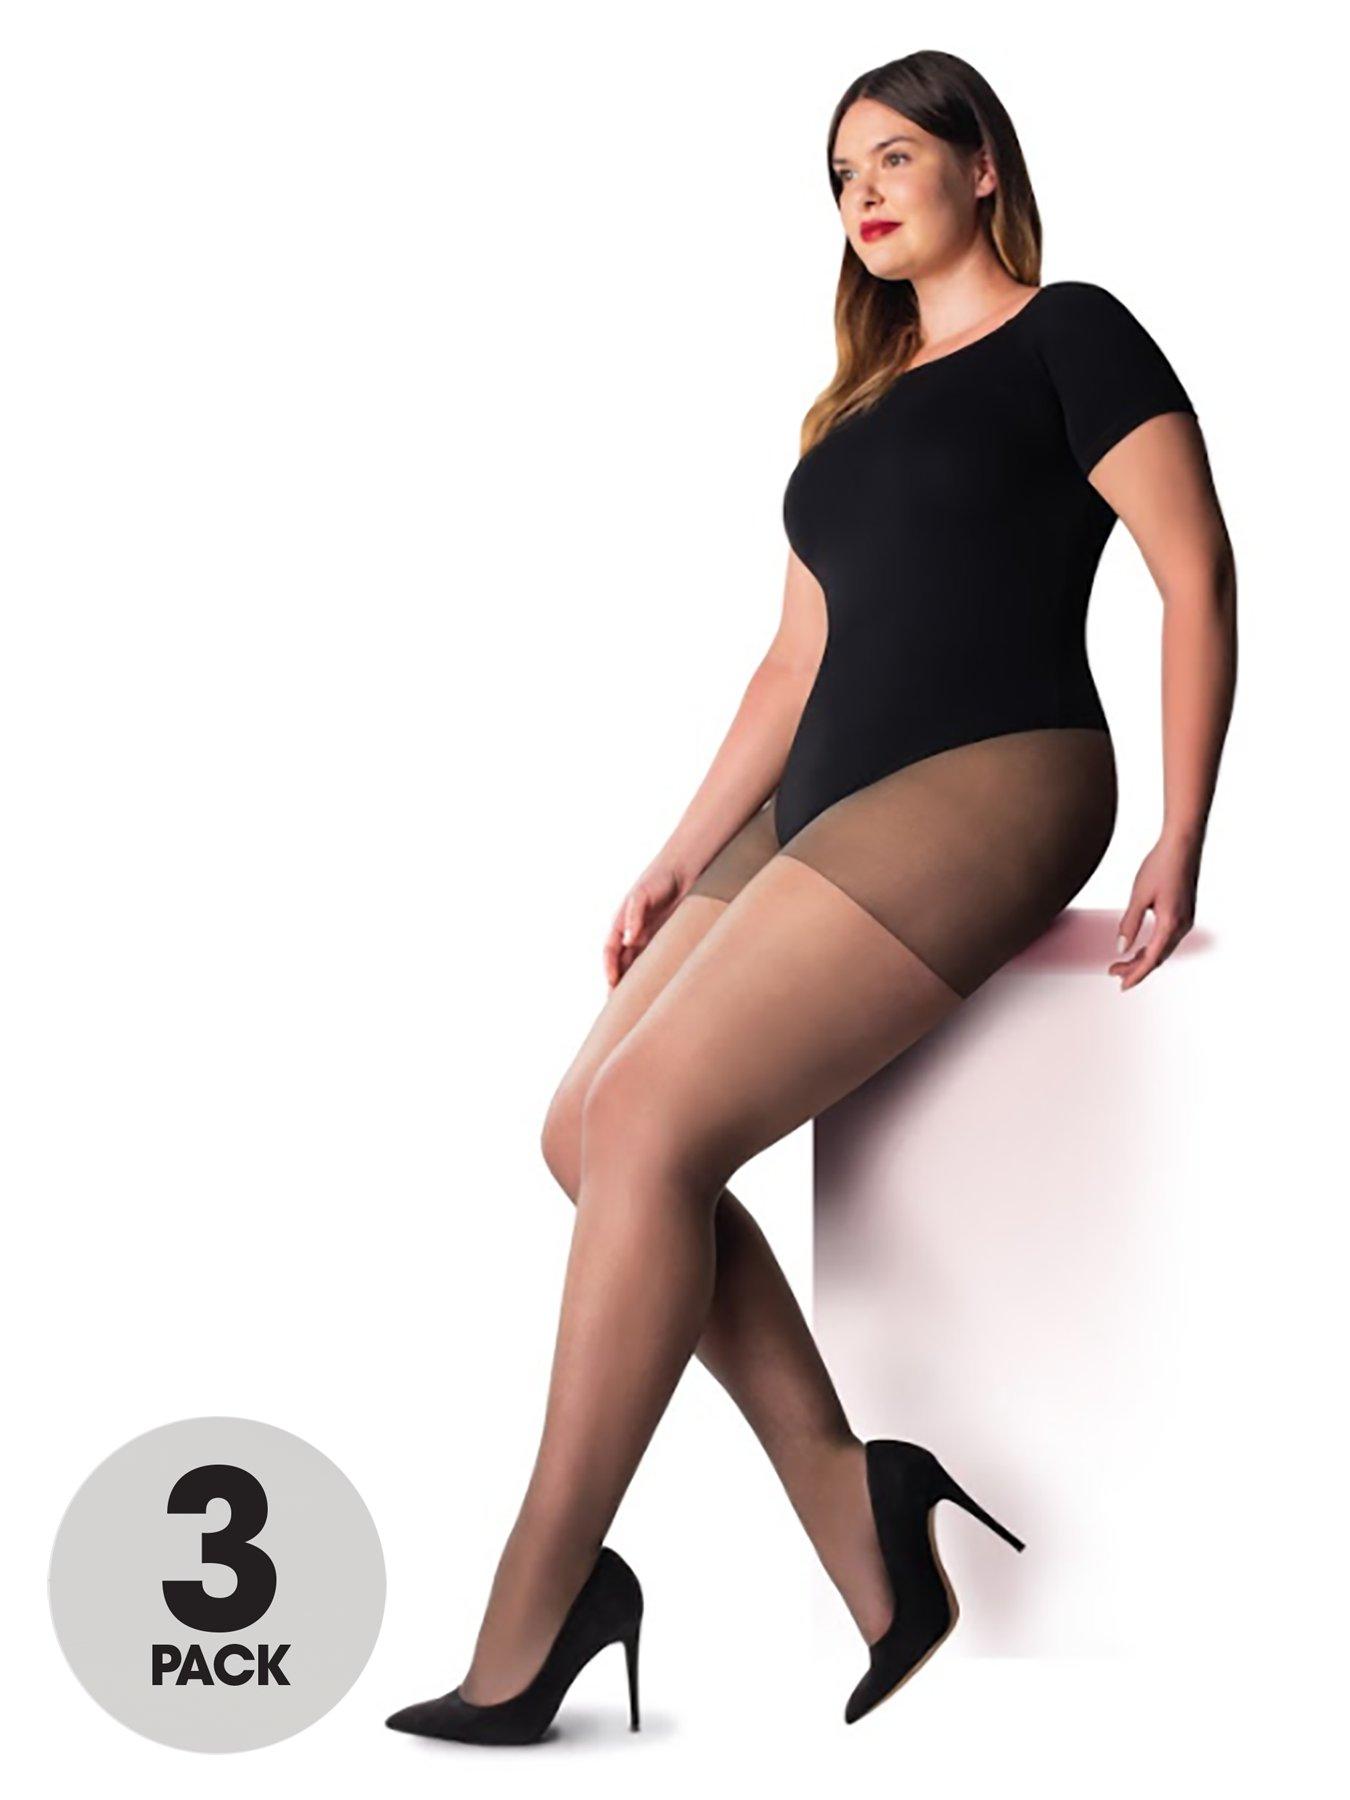  Knee Highs Hosiery Women Control Top Pantyhose with Run Light  Support Legs Sheer Tights Extra Fat Long (5-C, One Size) : Clothing, Shoes  & Jewelry